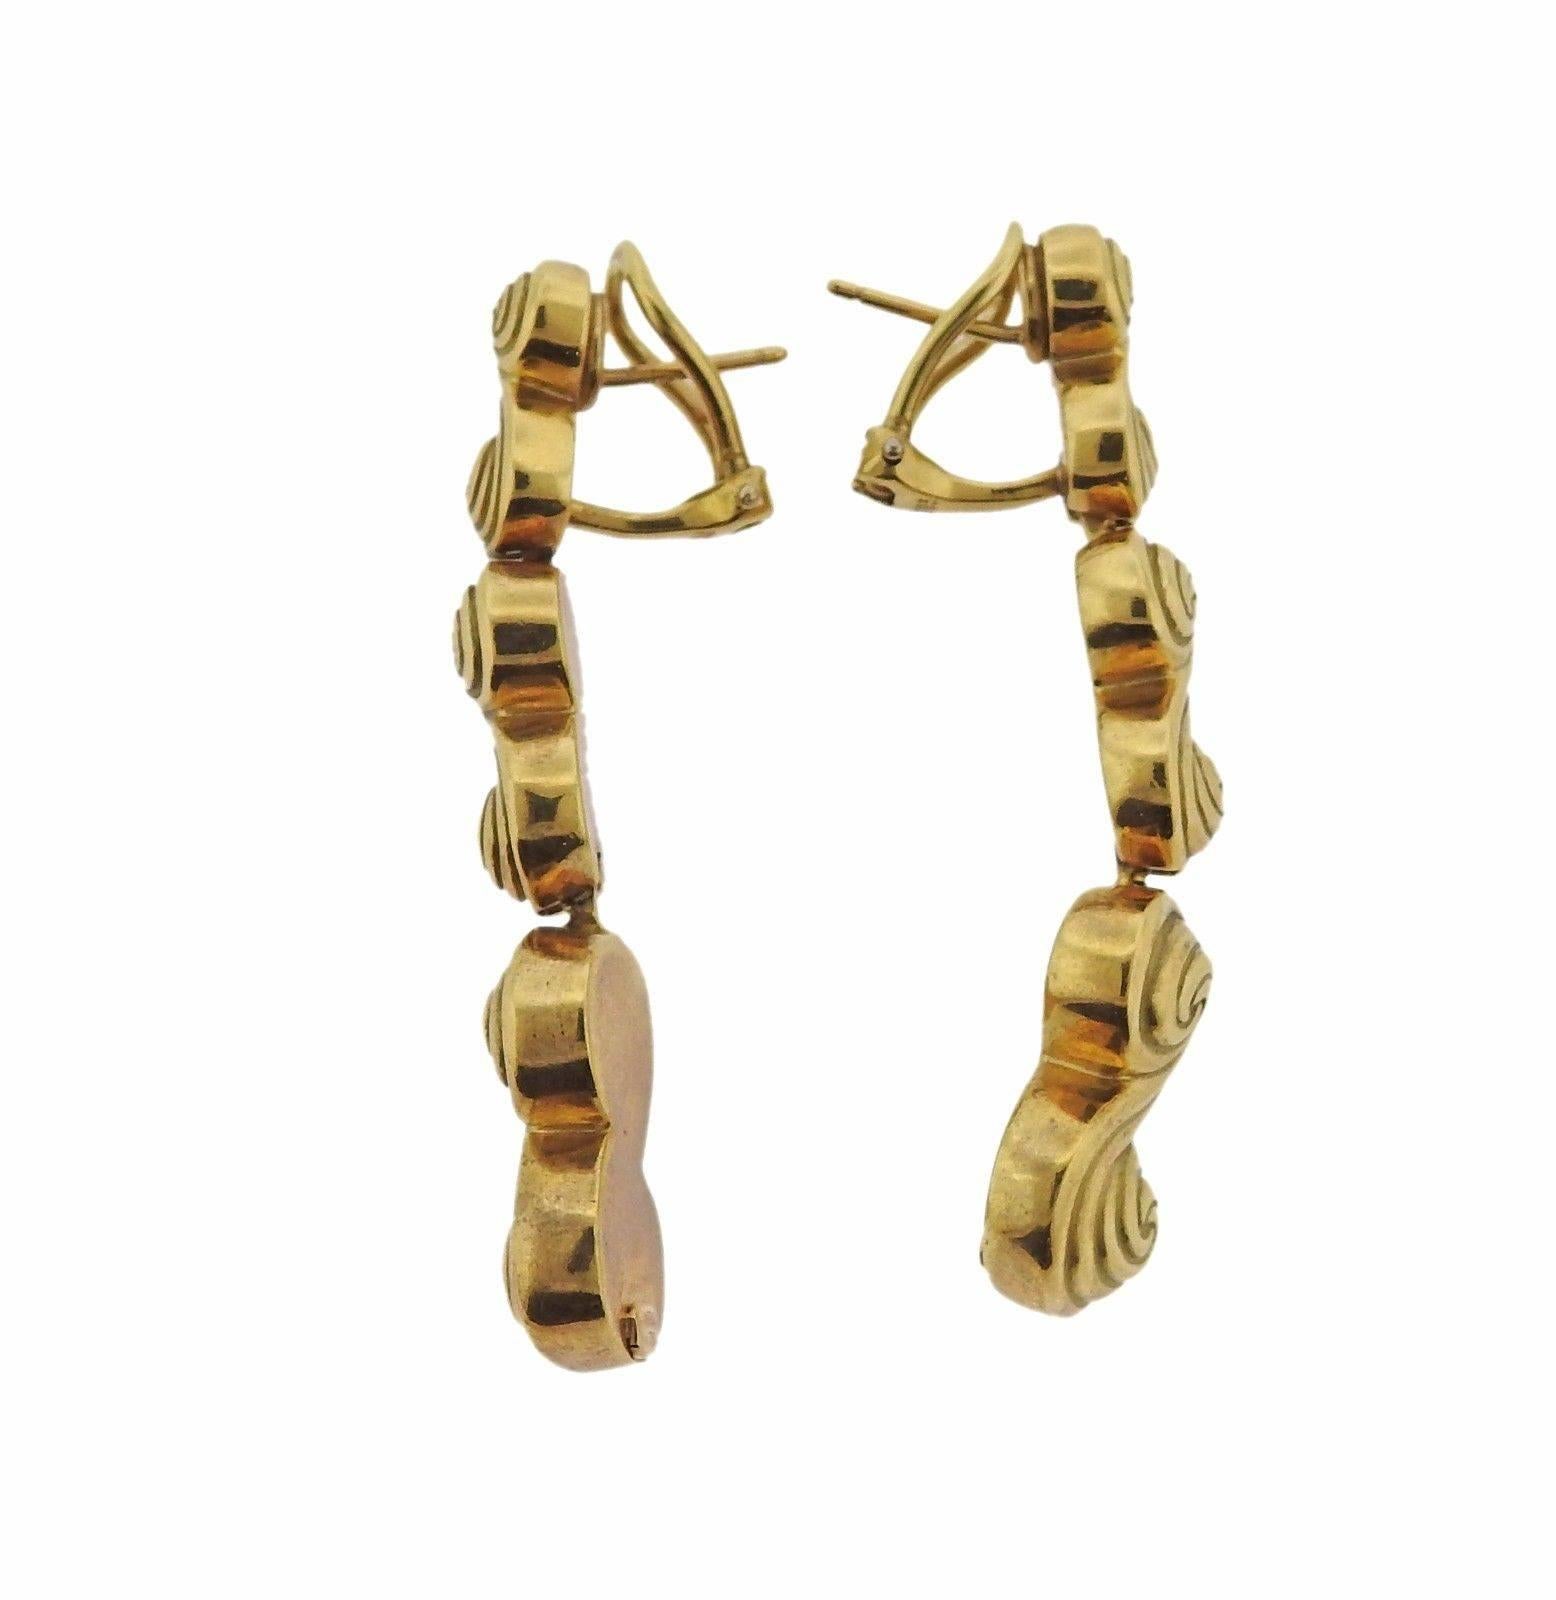 A pair of 18k yellow gold earrings by Tiffany & Co.  The earrings are 48mm long x 13mm at the widest point.  The weight of the pair is 26.2 grams.  Marked: T&Co, 750.